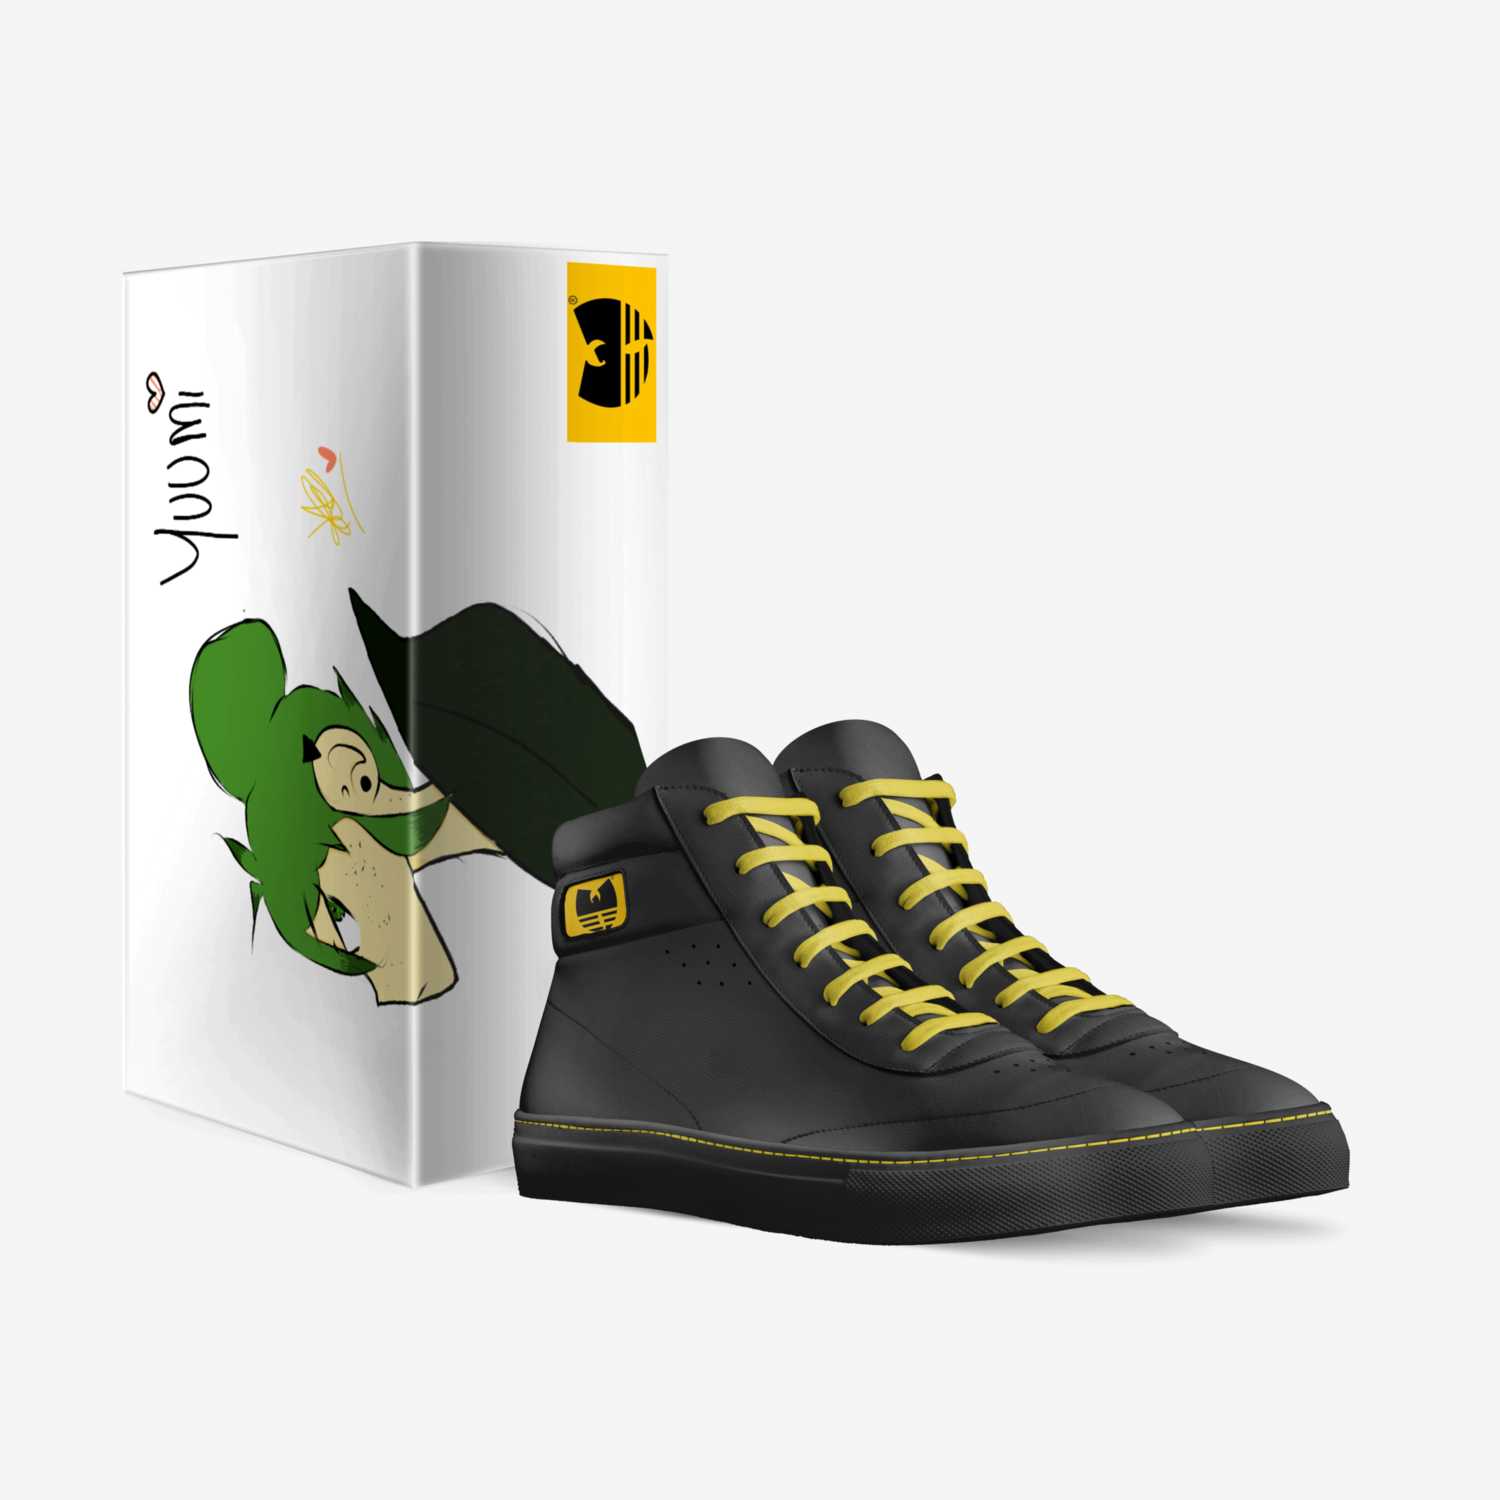 Luckyjoeyoung  custom made in Italy shoes by Joe Campbell | Box view